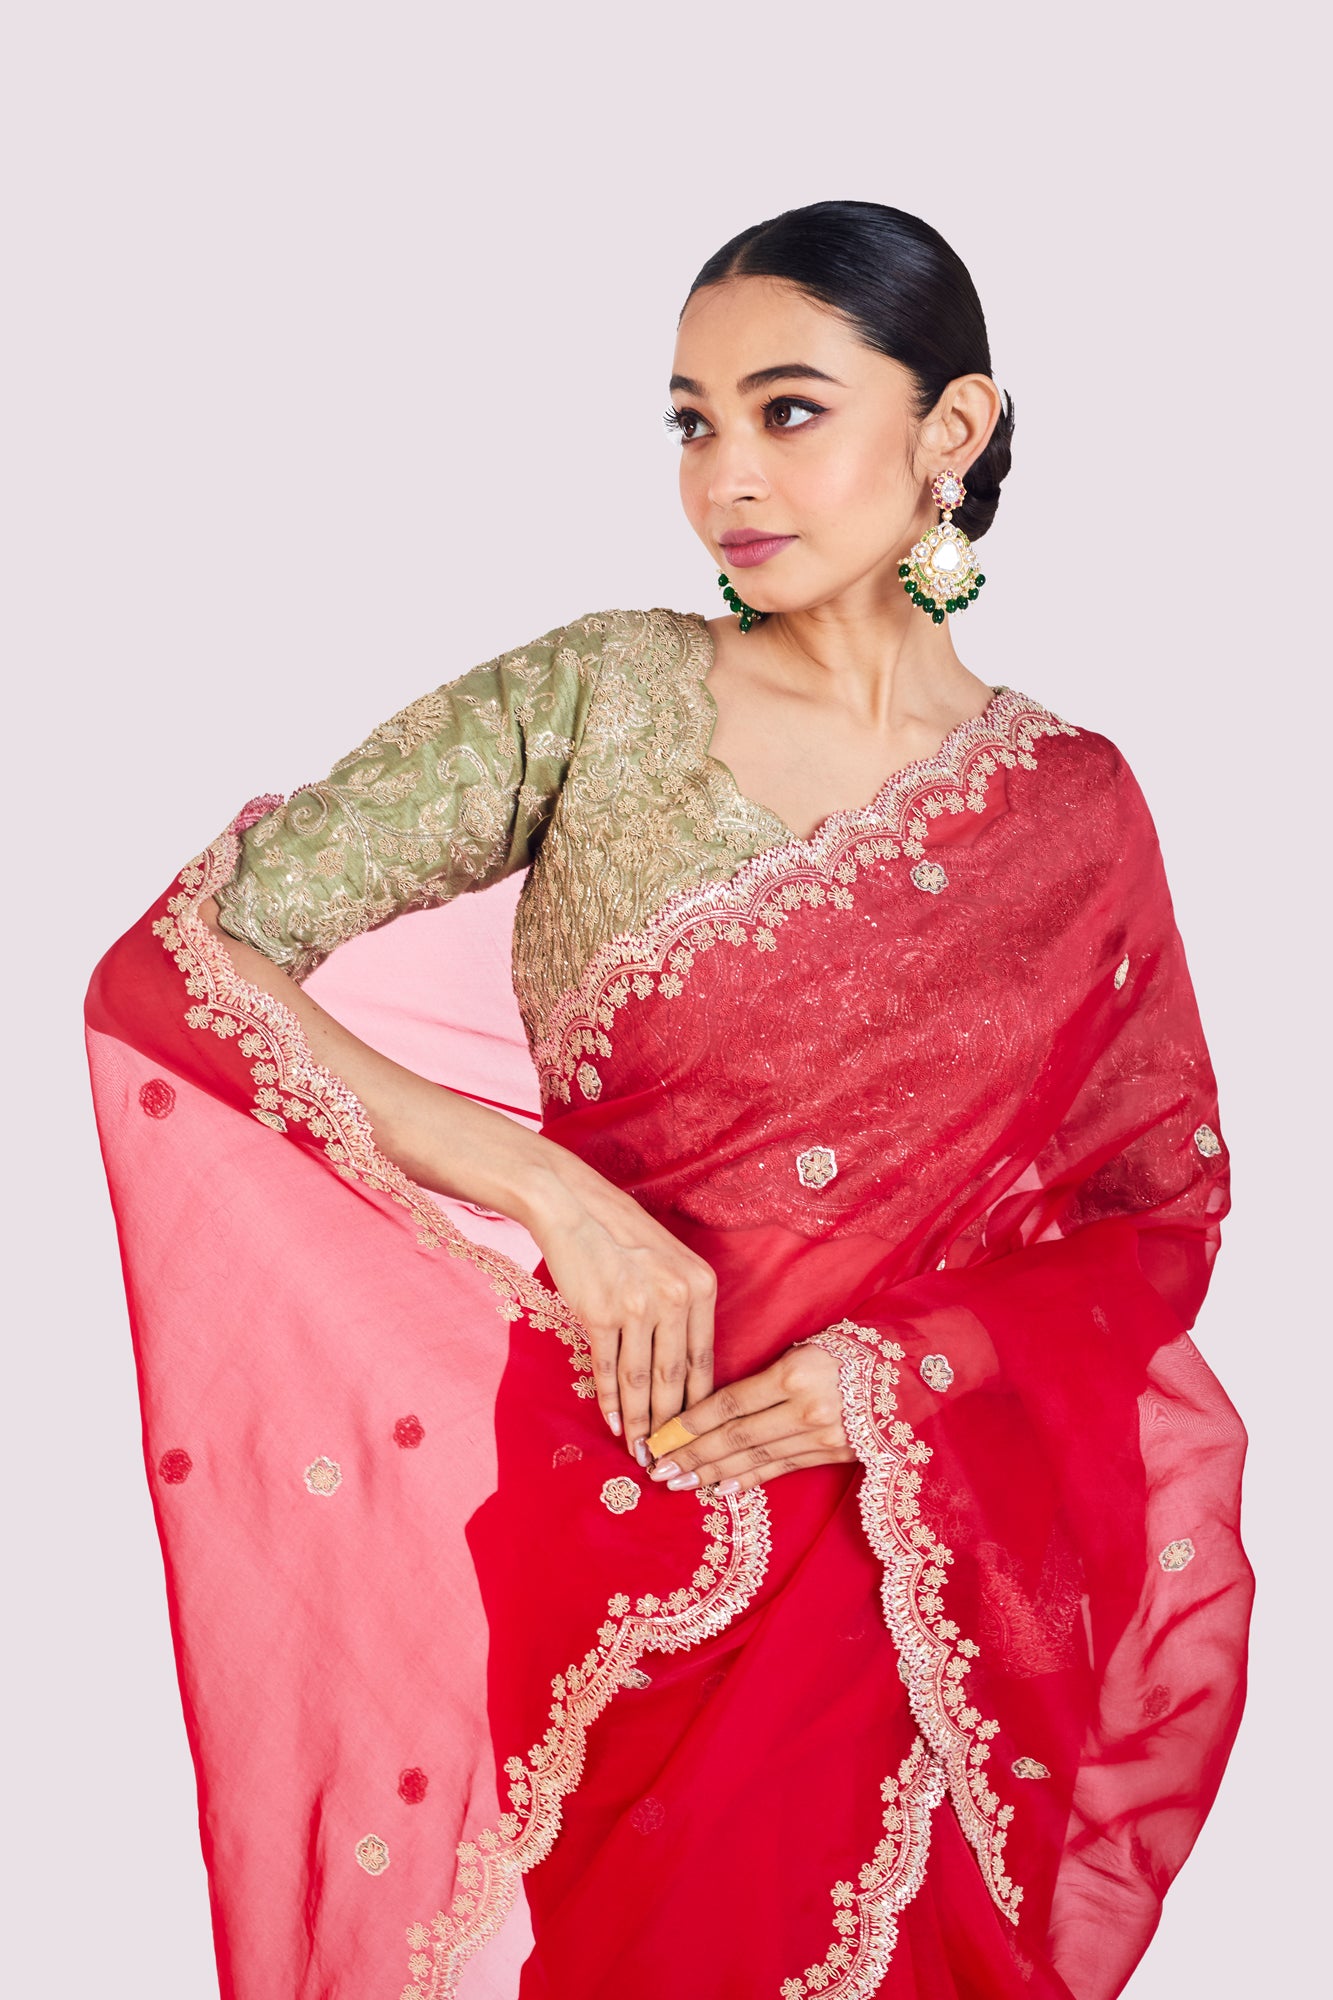 Buy red embroidered organza saree online in USA with green raw silk blouse. Look your best at parties and weddings in beautiful designer sarees, embroidered sarees, handwoven sarees, silk sarees, organza saris from Pure Elegance Indian saree store in USA.-closeup